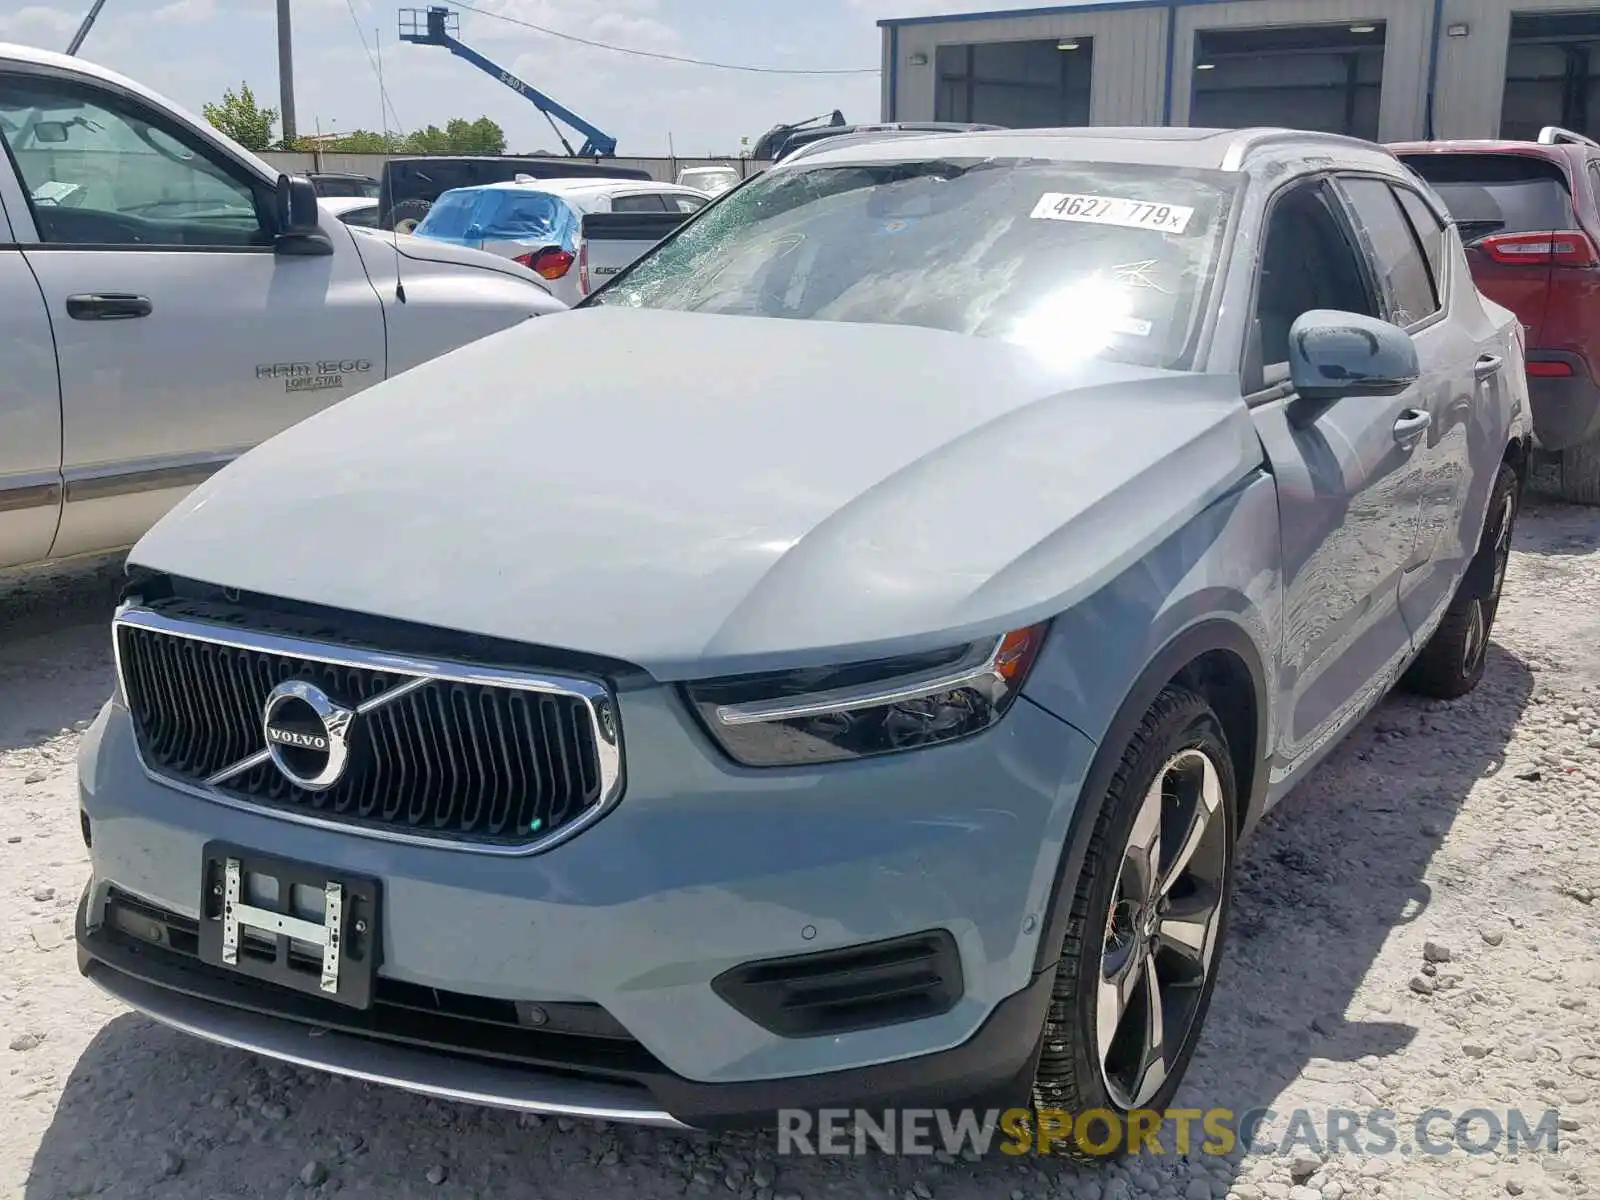 2 Photograph of a damaged car YV4162UK8K2090156 VOLVO XC40 T5 2019